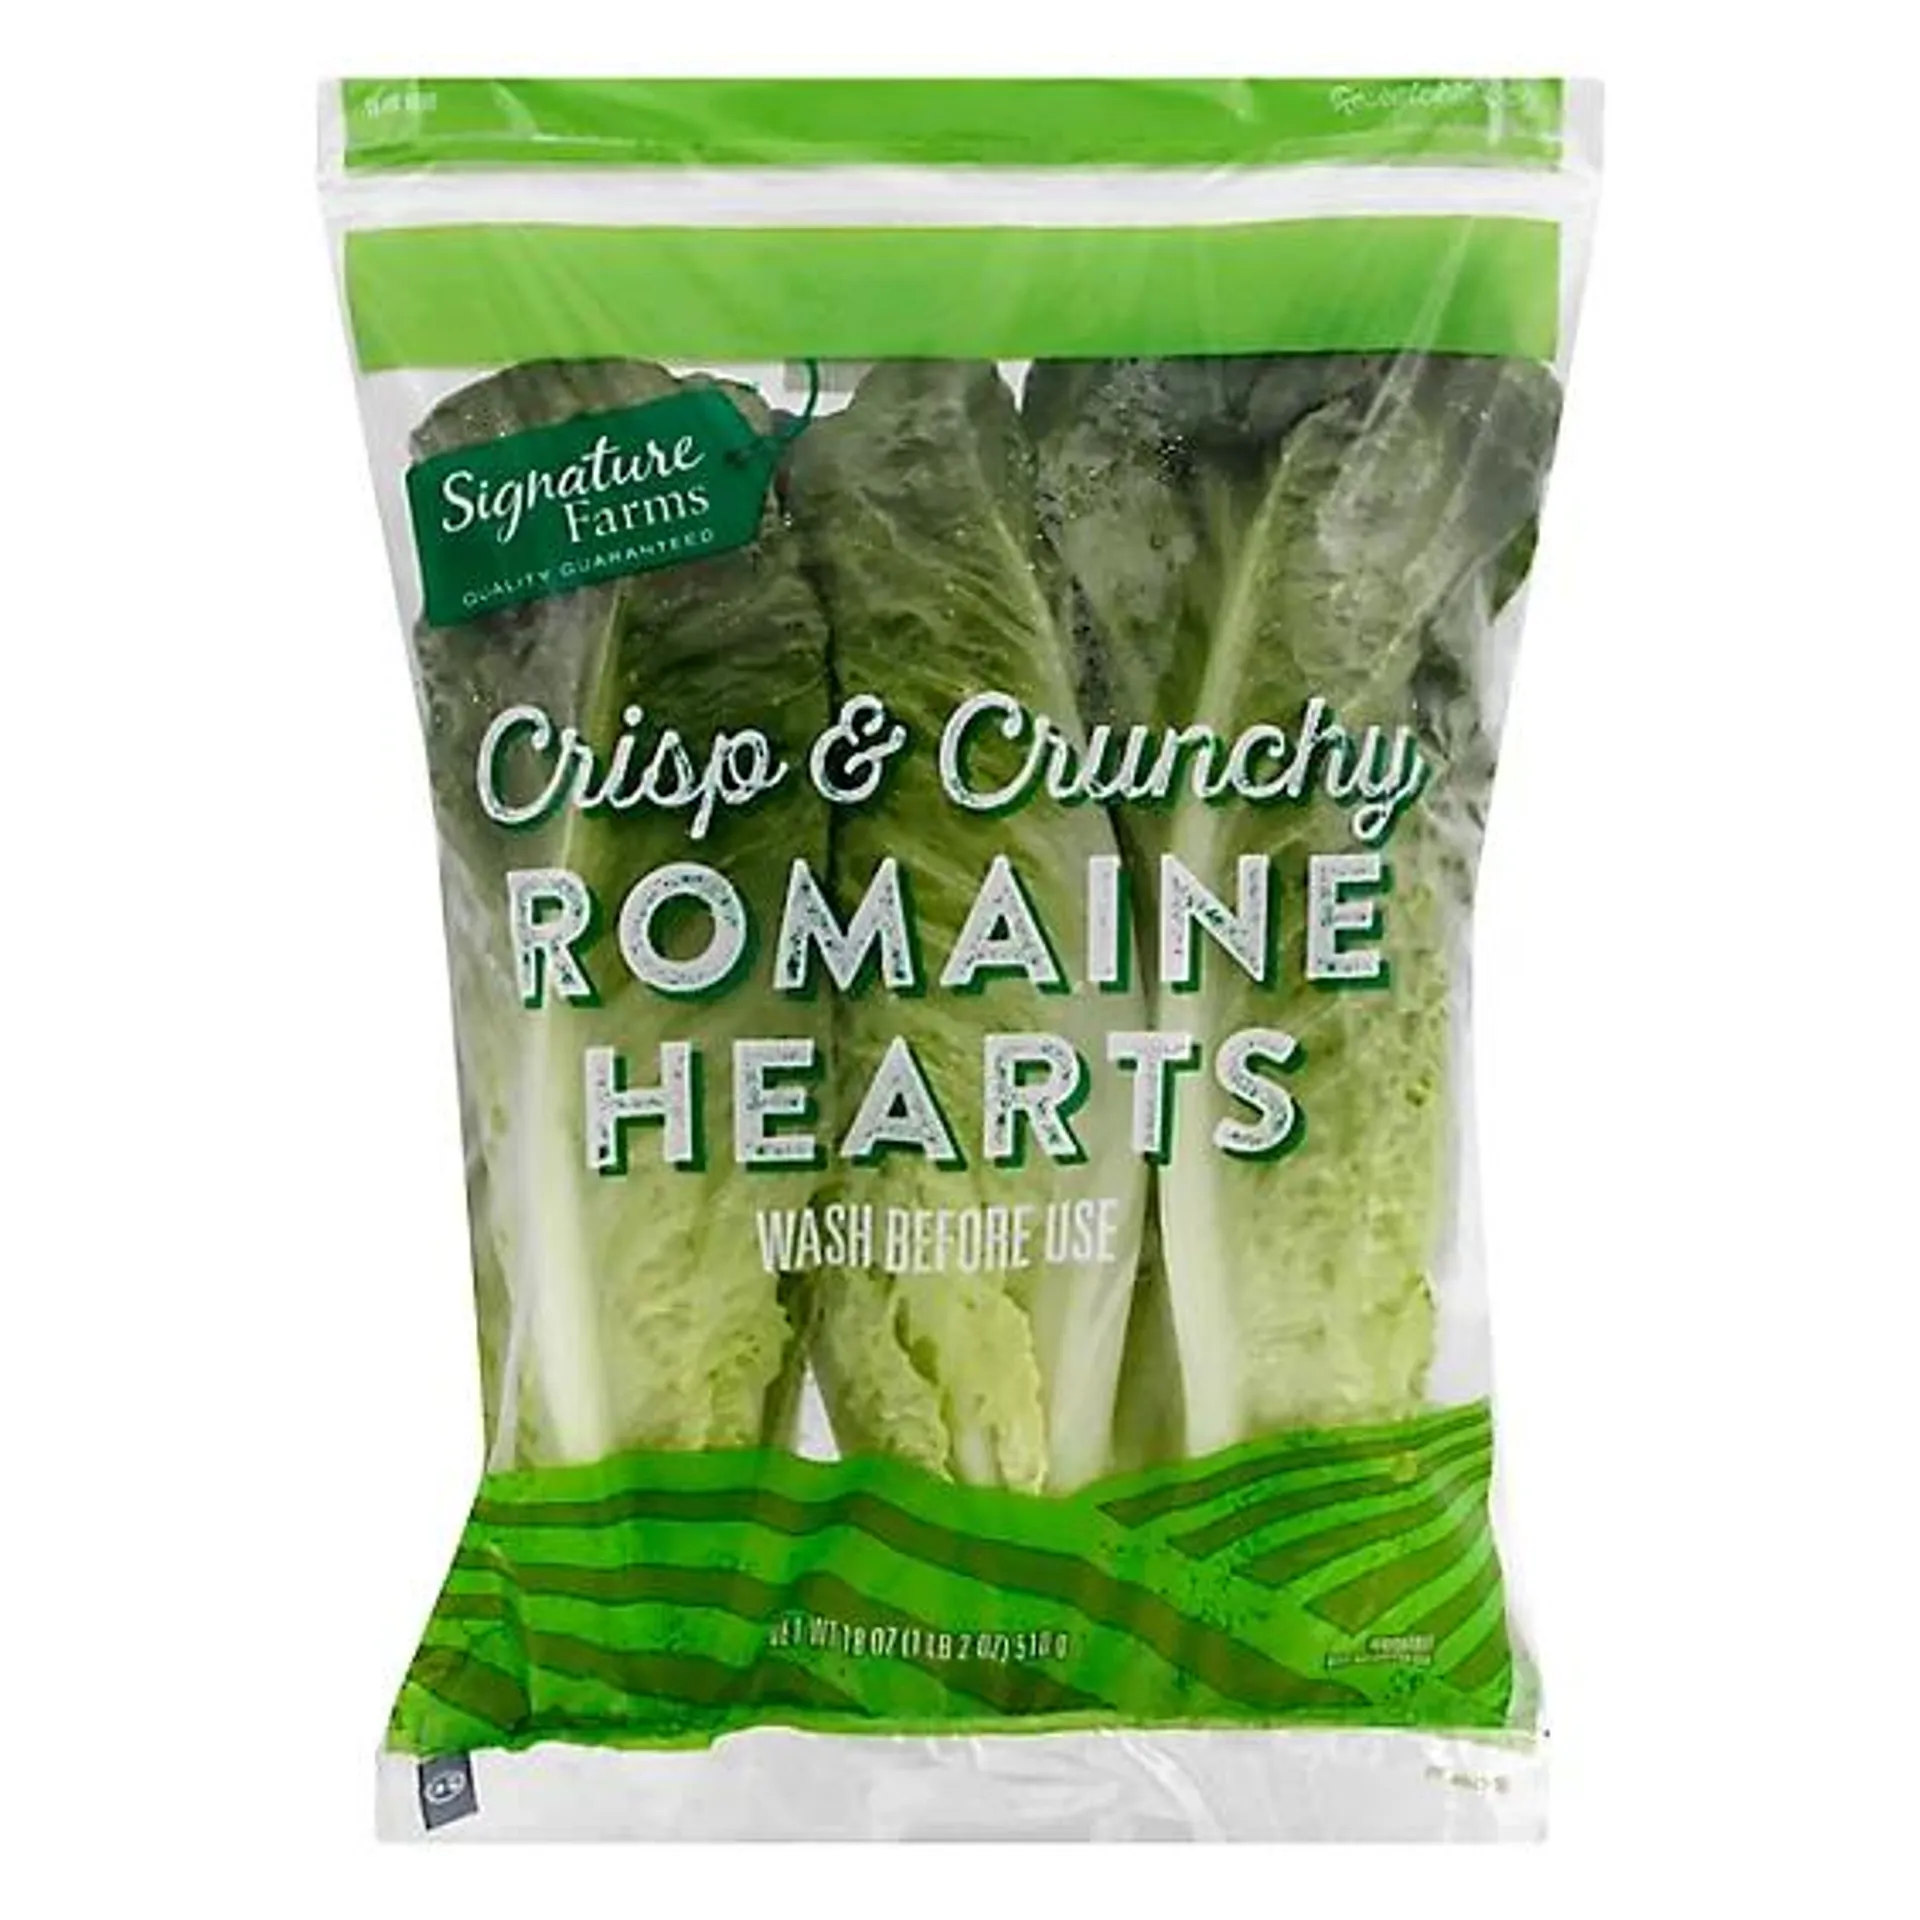 Signature Select/Farms Romaine Hearts Prepackaged - 3 Count